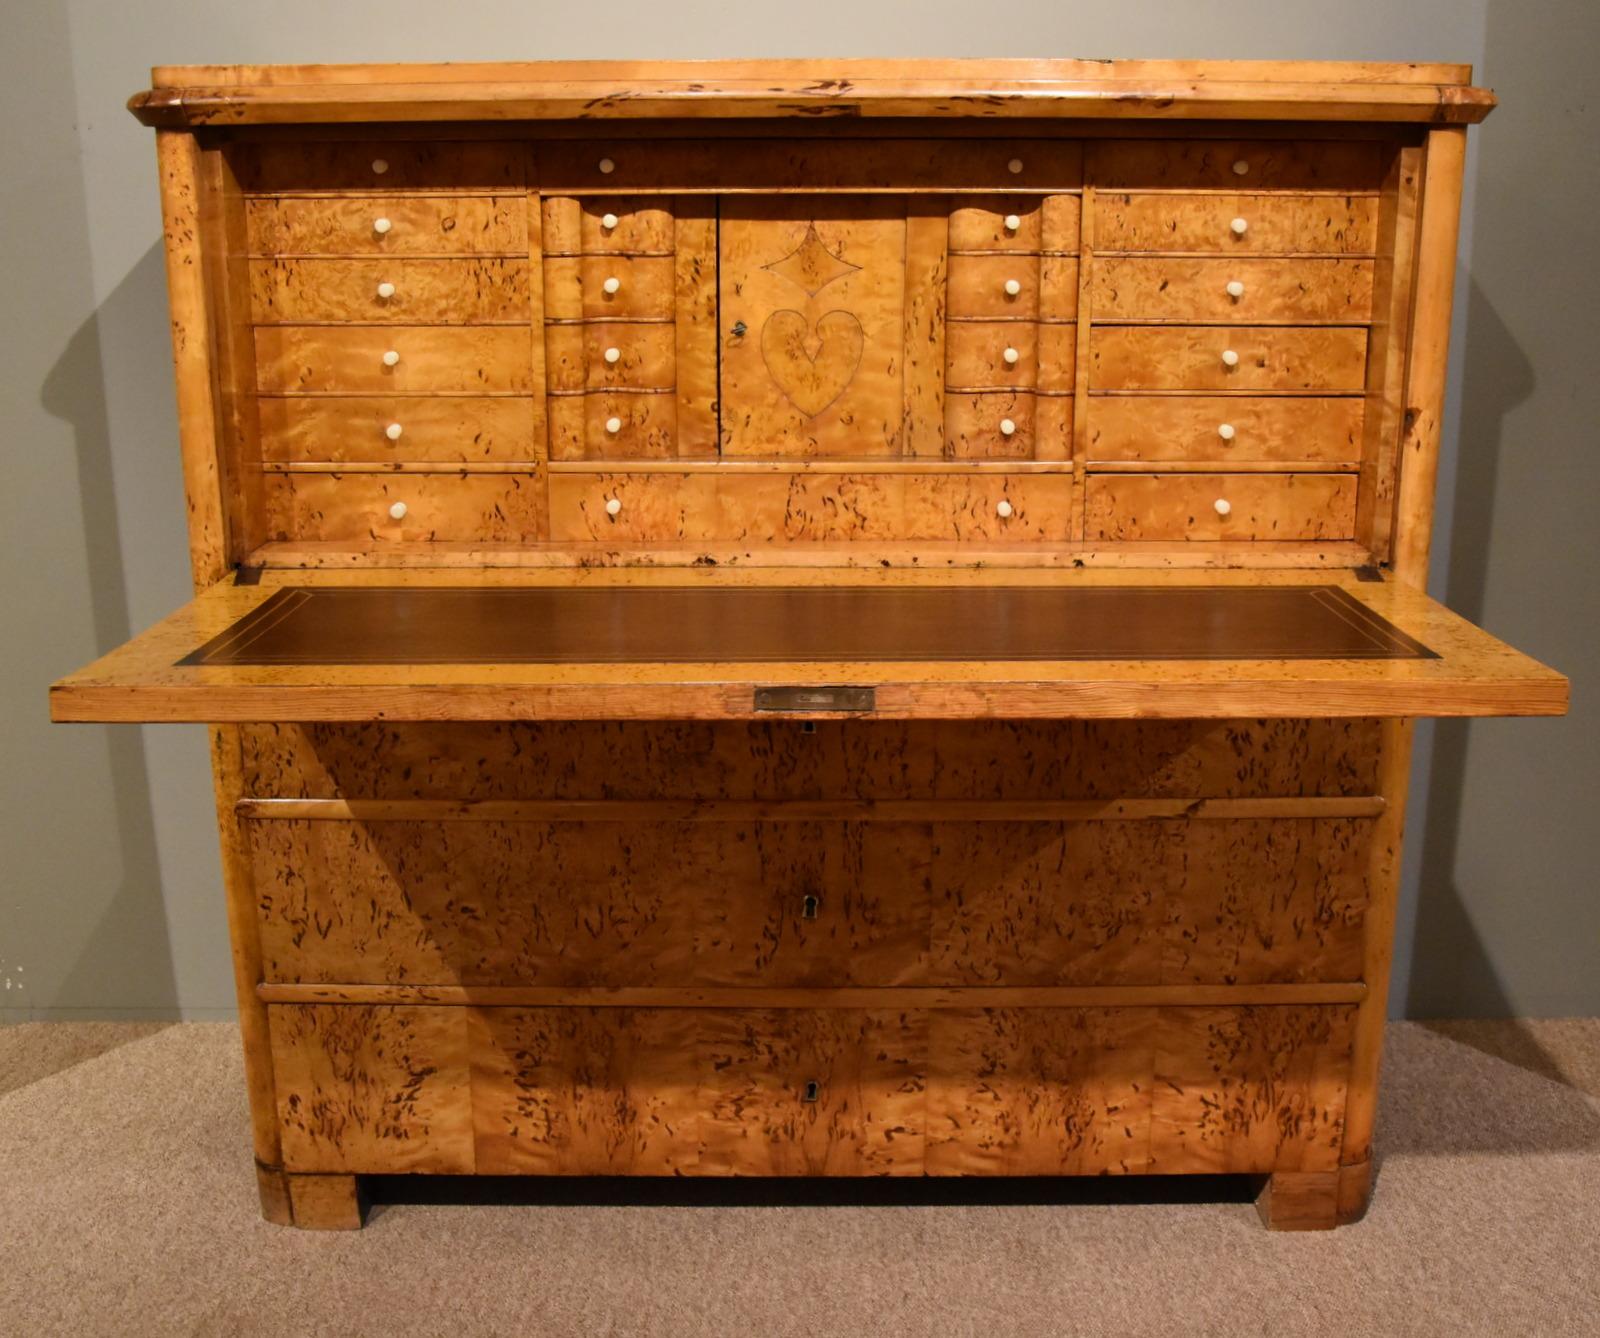 A stylish masur birch Biedermeier escritoire. A very stylish Swedish writing cabinet fitted interior and feather lined writing surface of Biedermeir period. 

Dimensions:
height 49.5